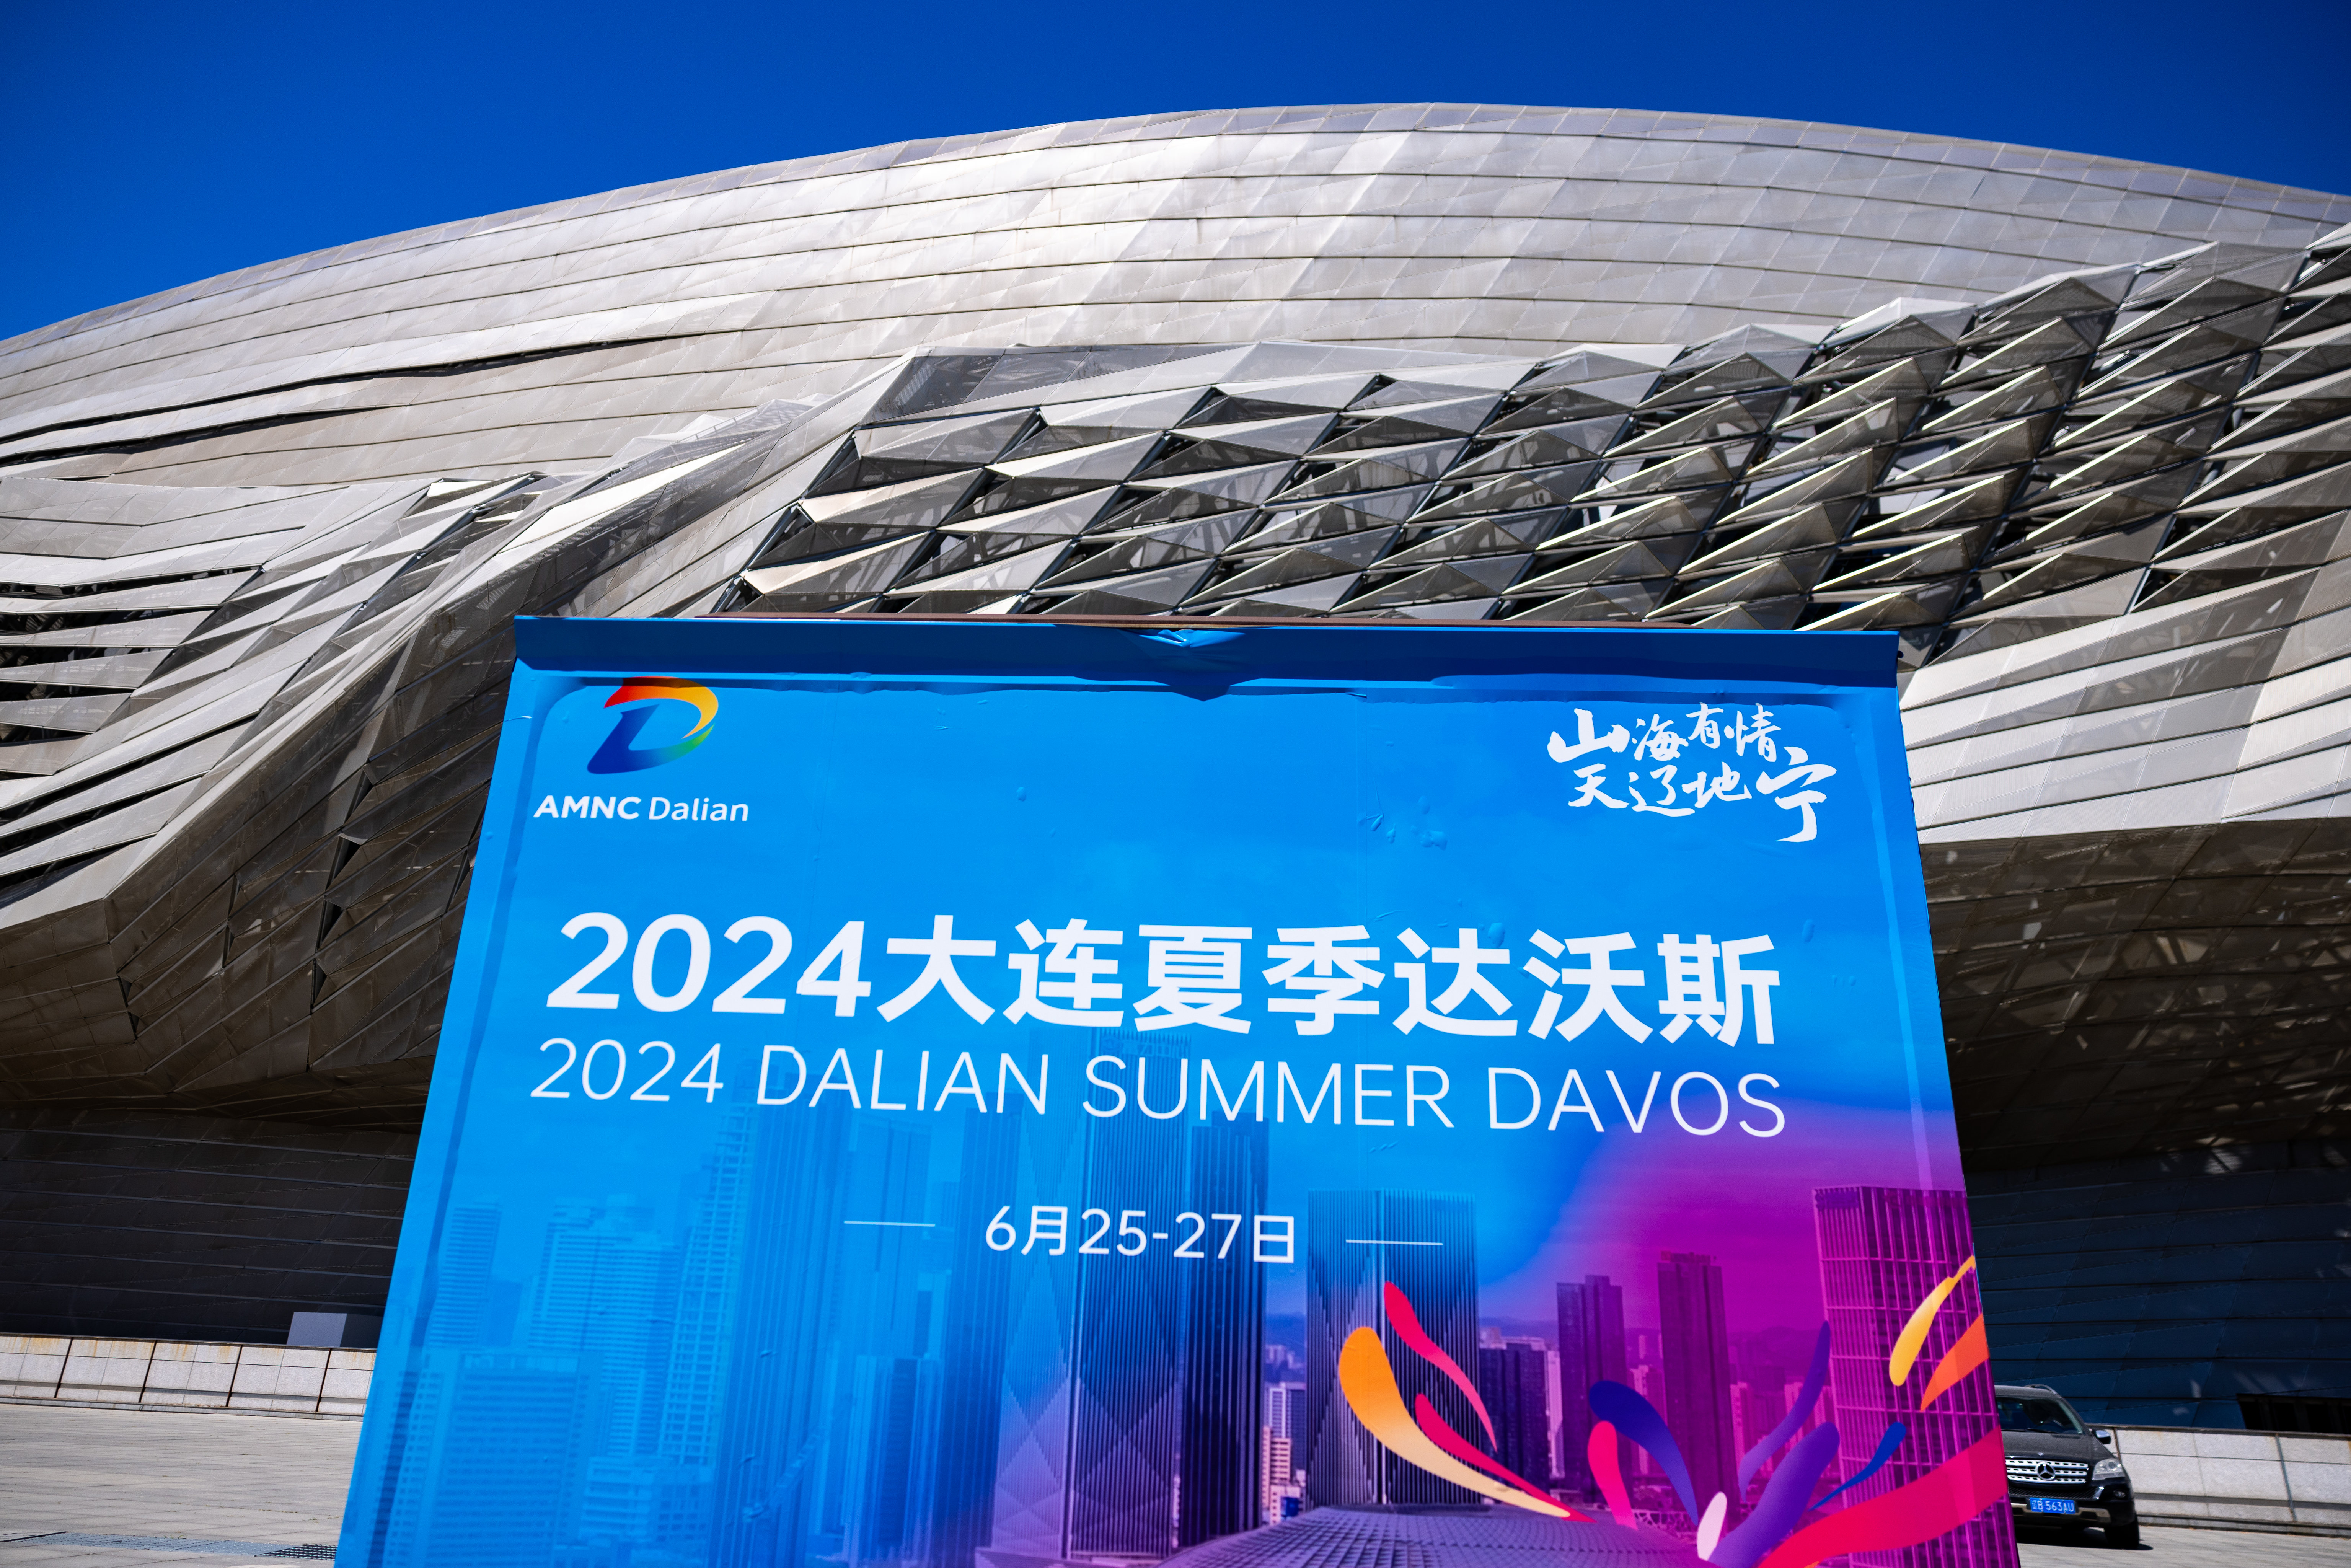 The World Economic Forum held Summer Davos 2024 in Dalian, China from June 25 to June 27. (Photo credit: The World Economic Forum)